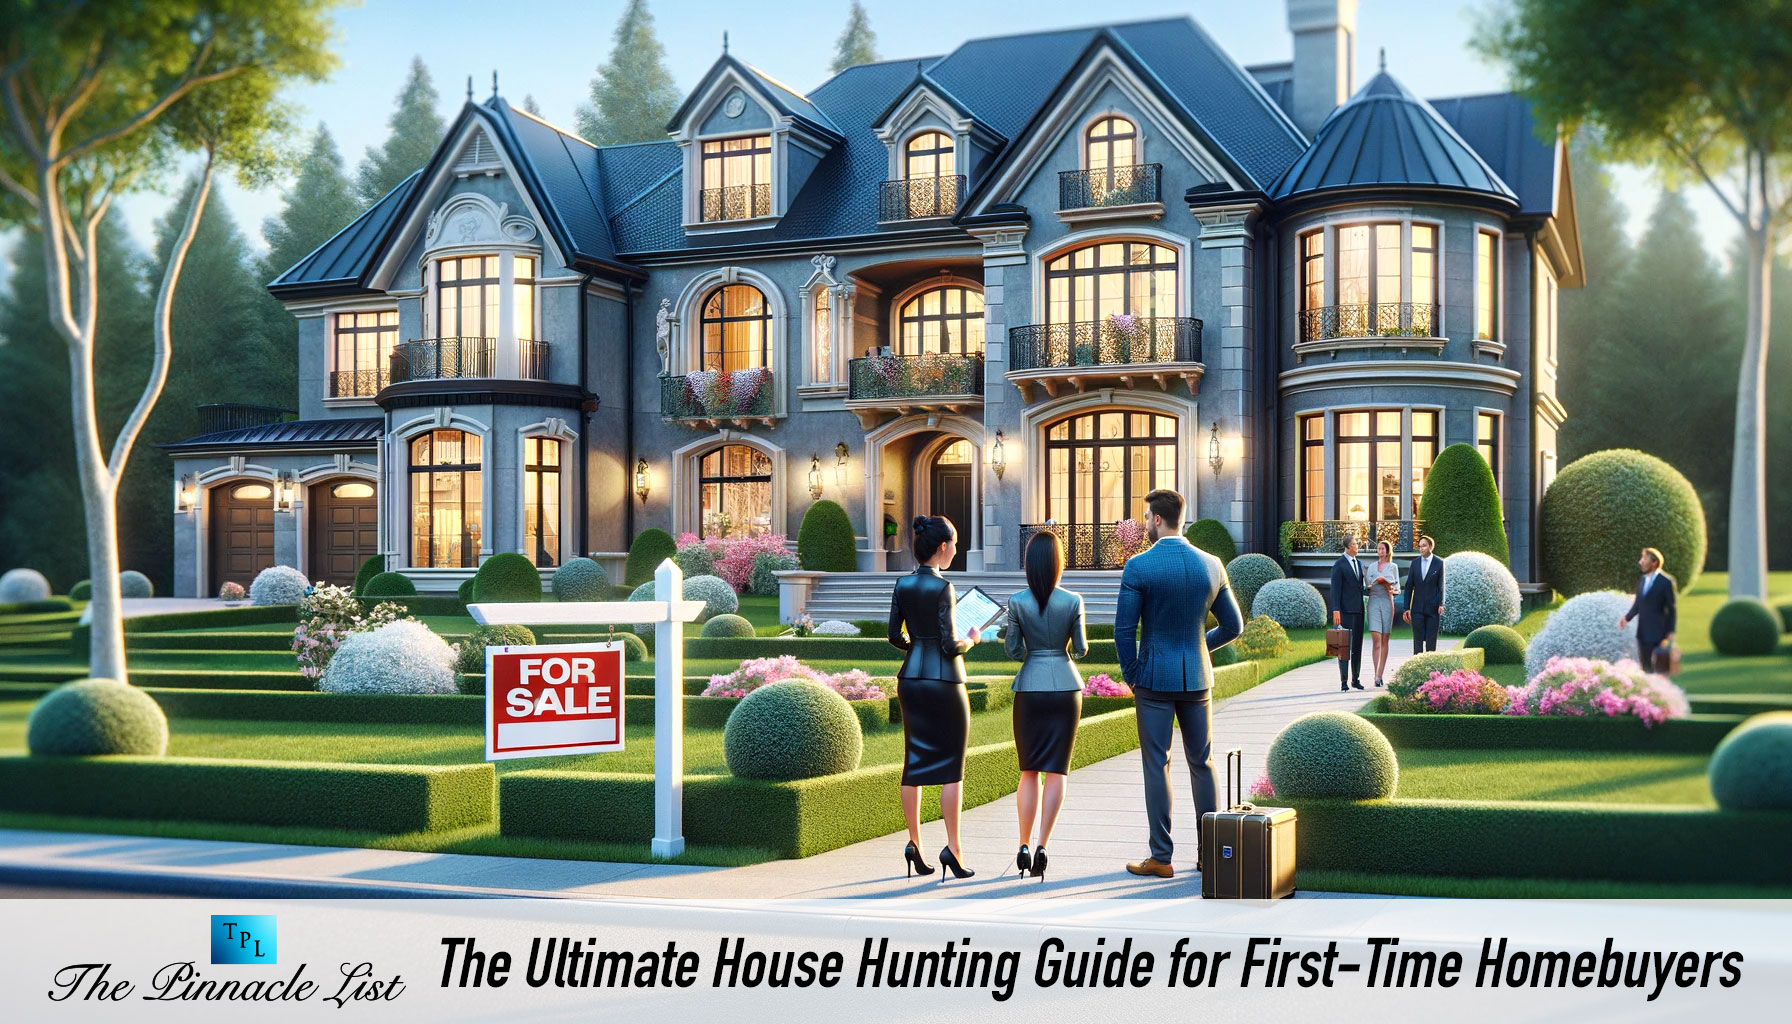 The Ultimate House Hunting Guide for First-Time Homebuyers